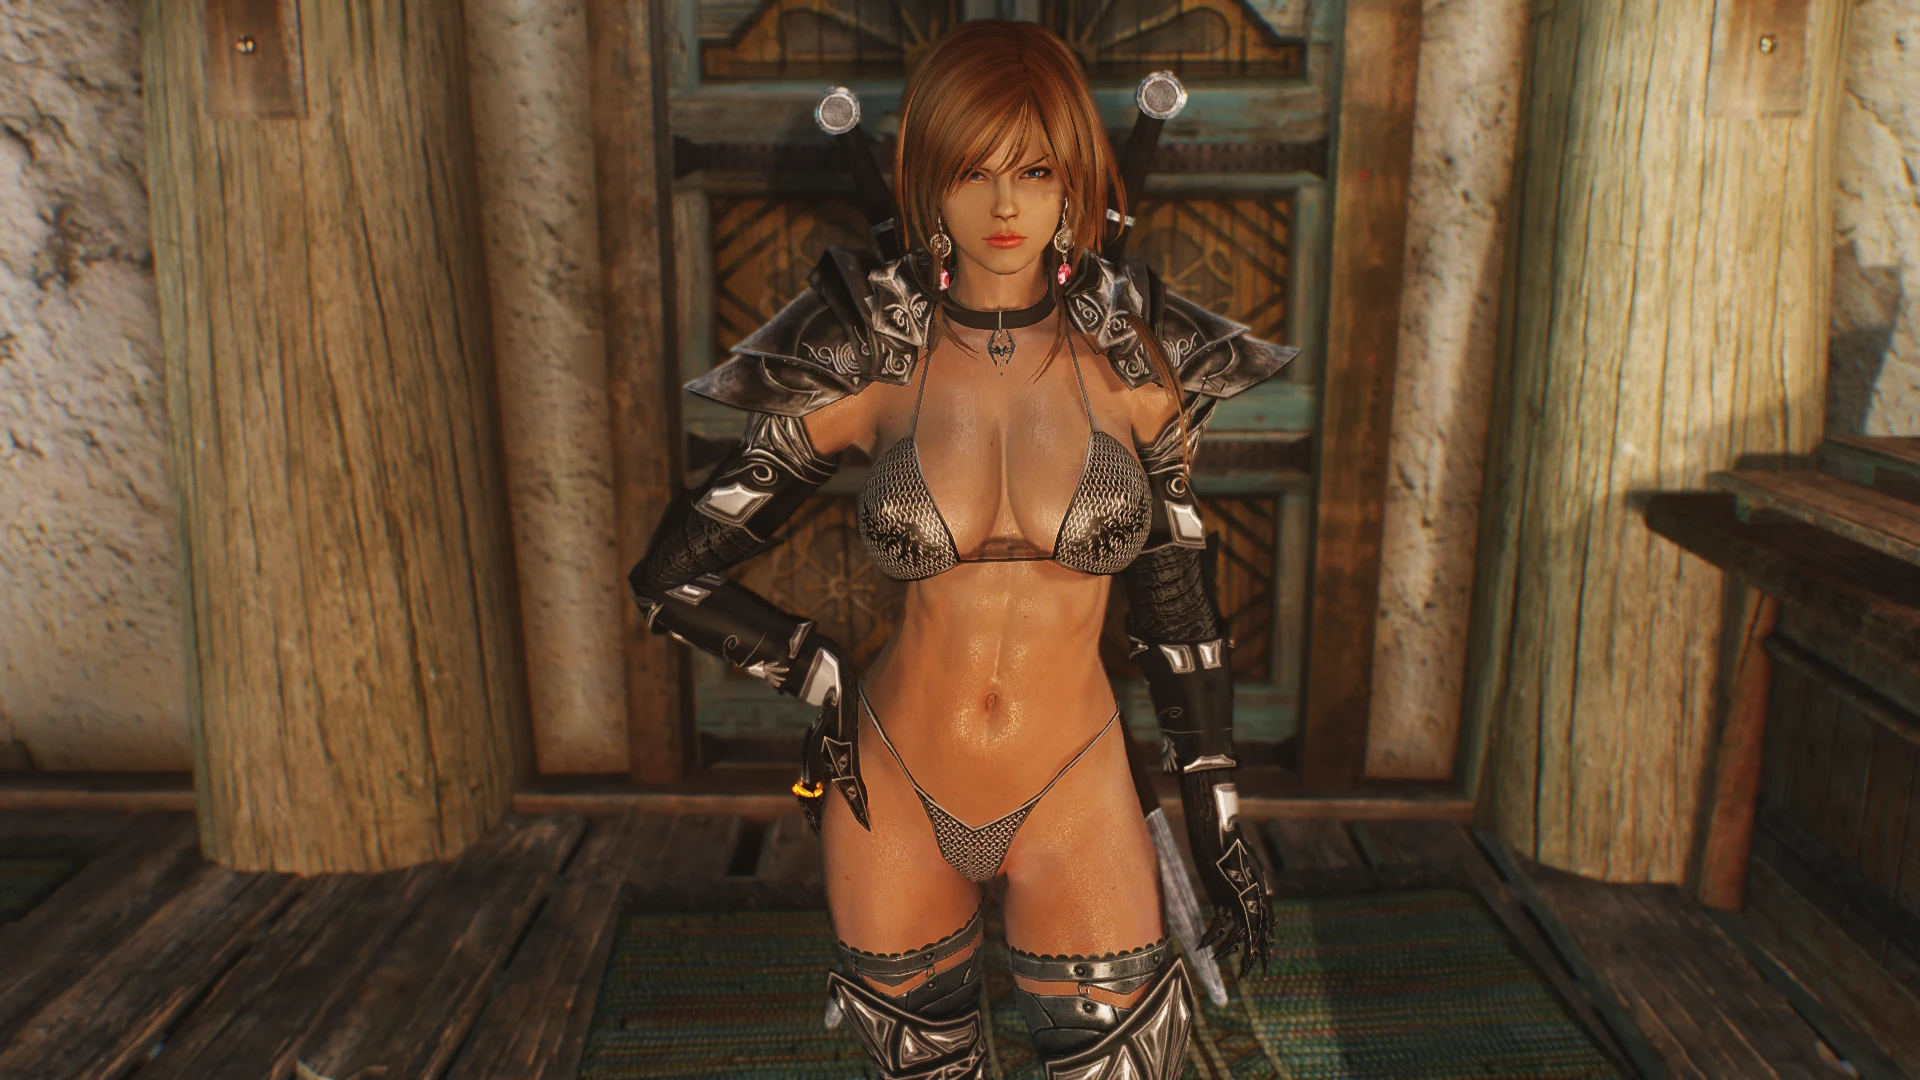 but the armor seems to me like some variant of the Sexy Ebony Armor